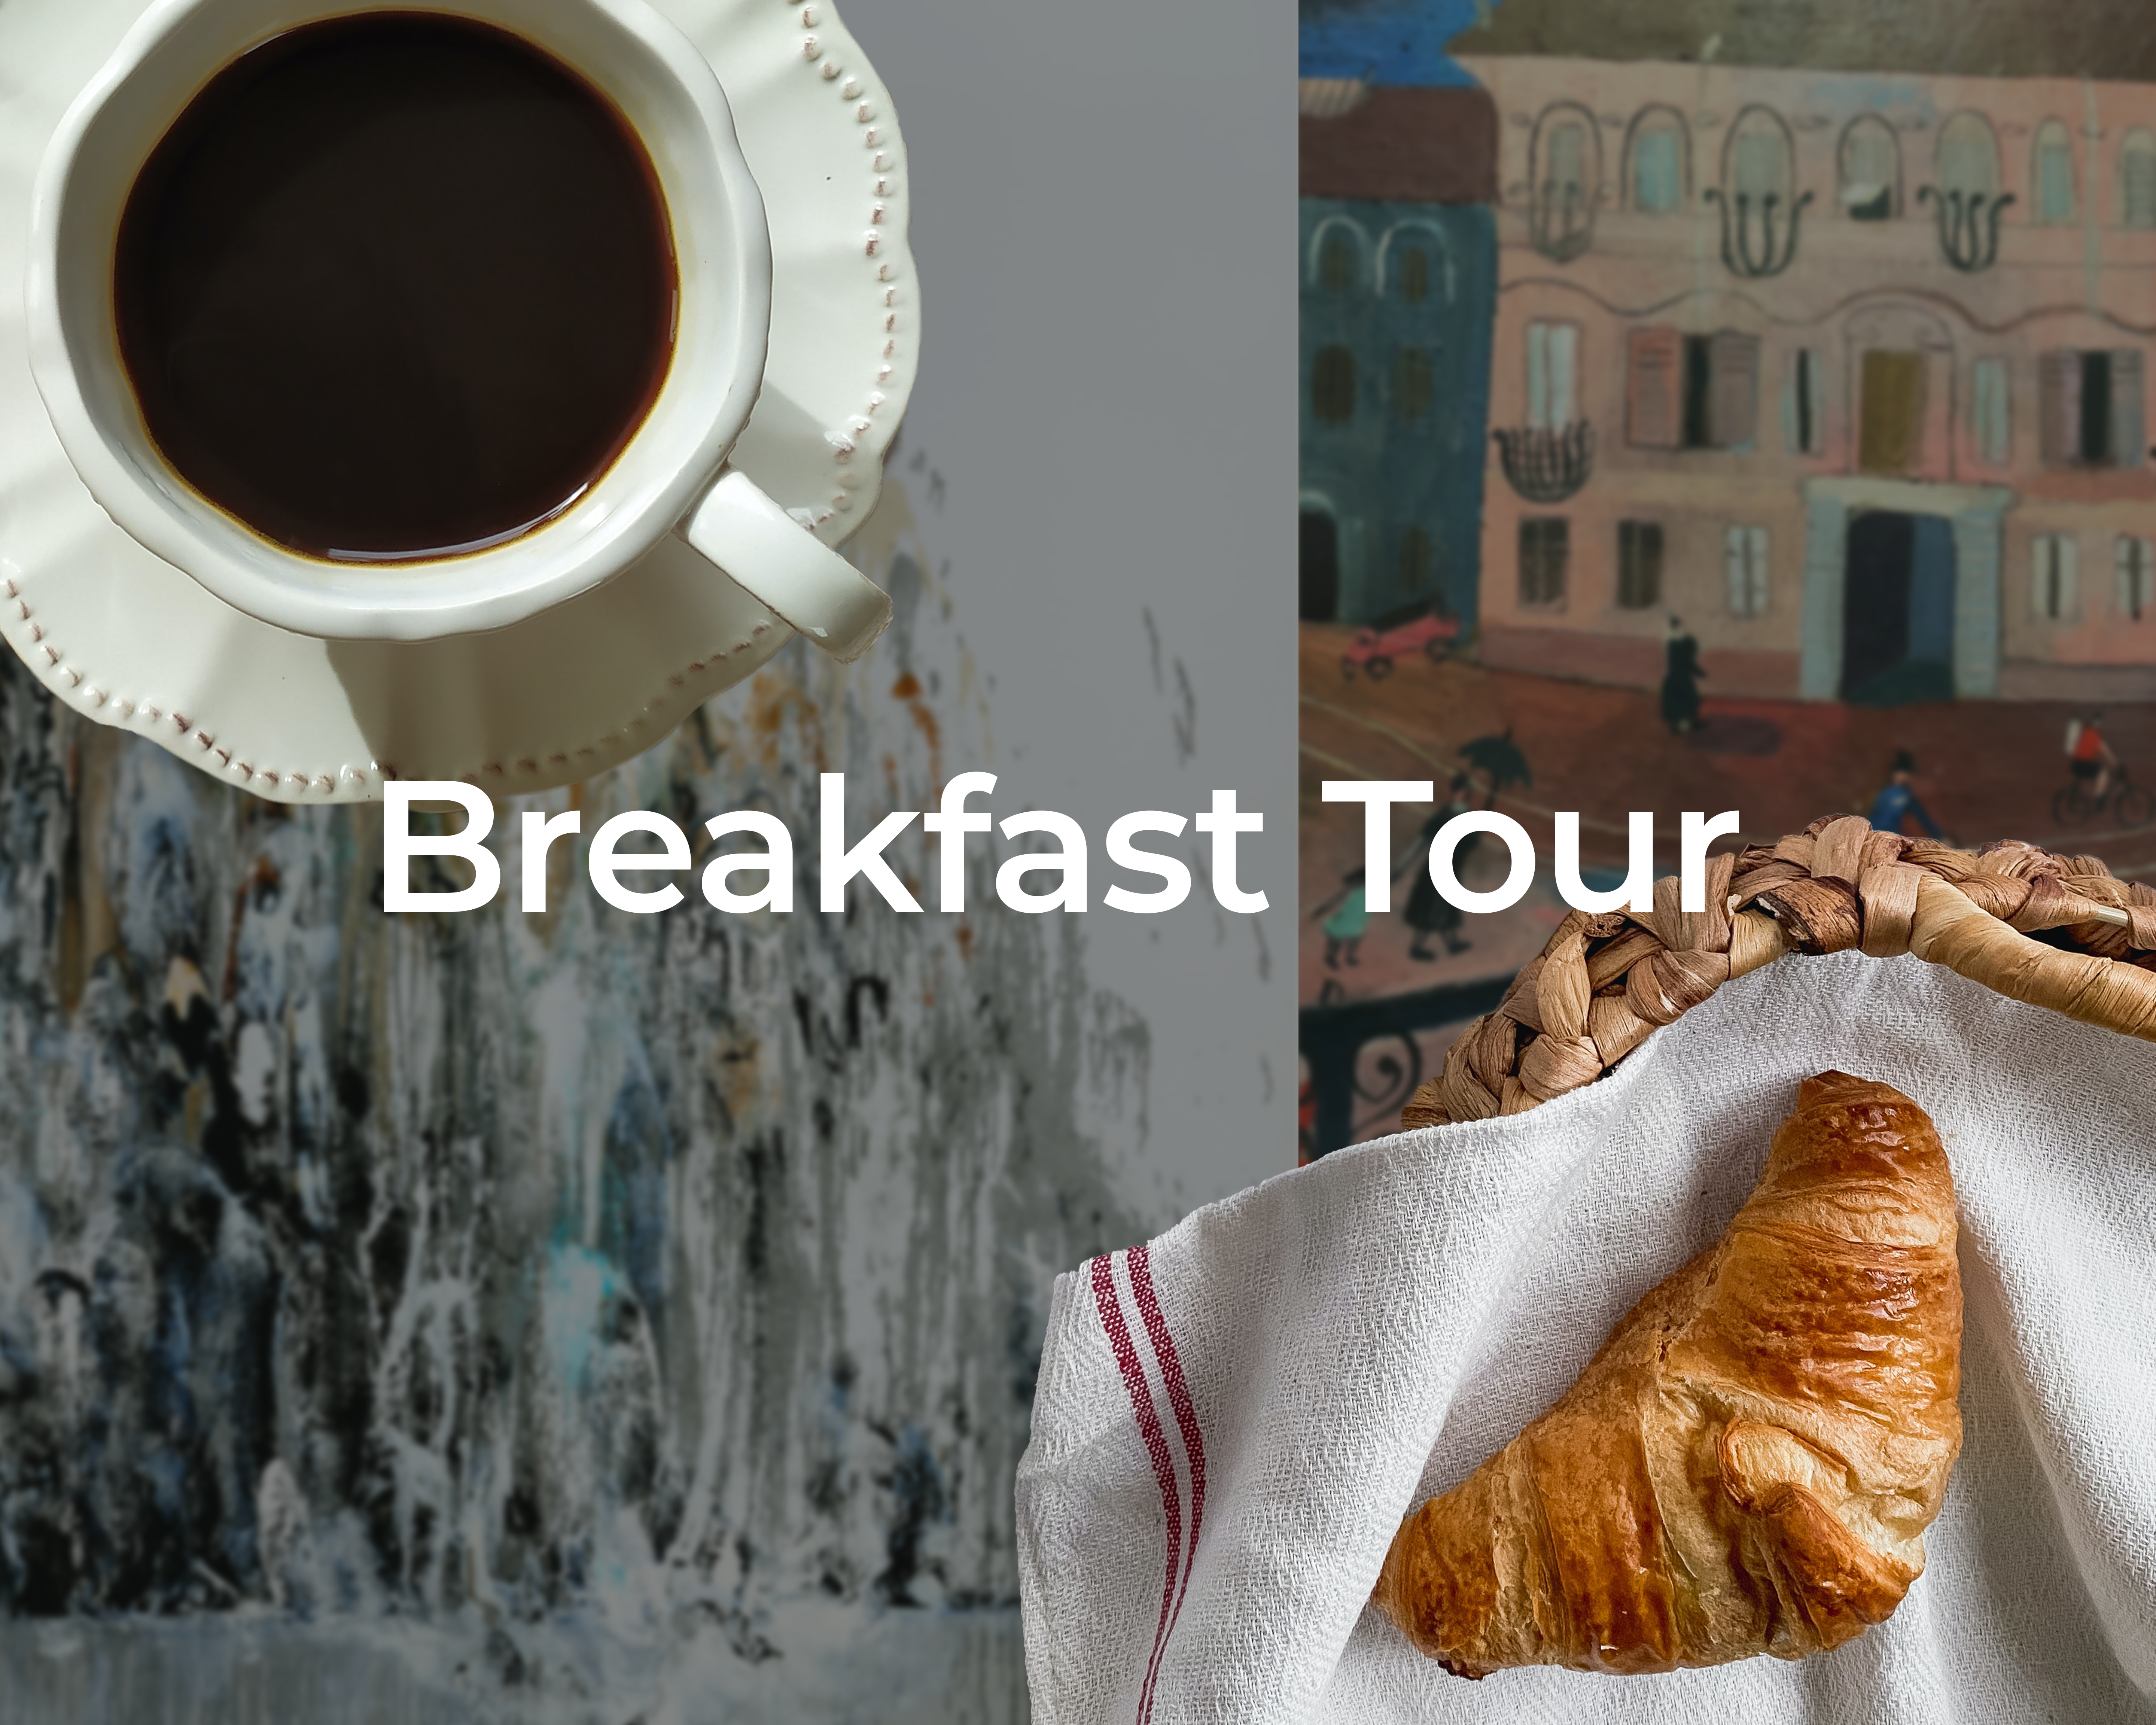 An image of a croissant in a basket with a cup of coffee to the left of it. There are two details of artwork in the background. To the left is 'Wall of Water I' by Maggi Hambling and to the right is, 'Street Sceen' by Suzanne Cooper. There is overlayed text which reads: Breakfast Tour.